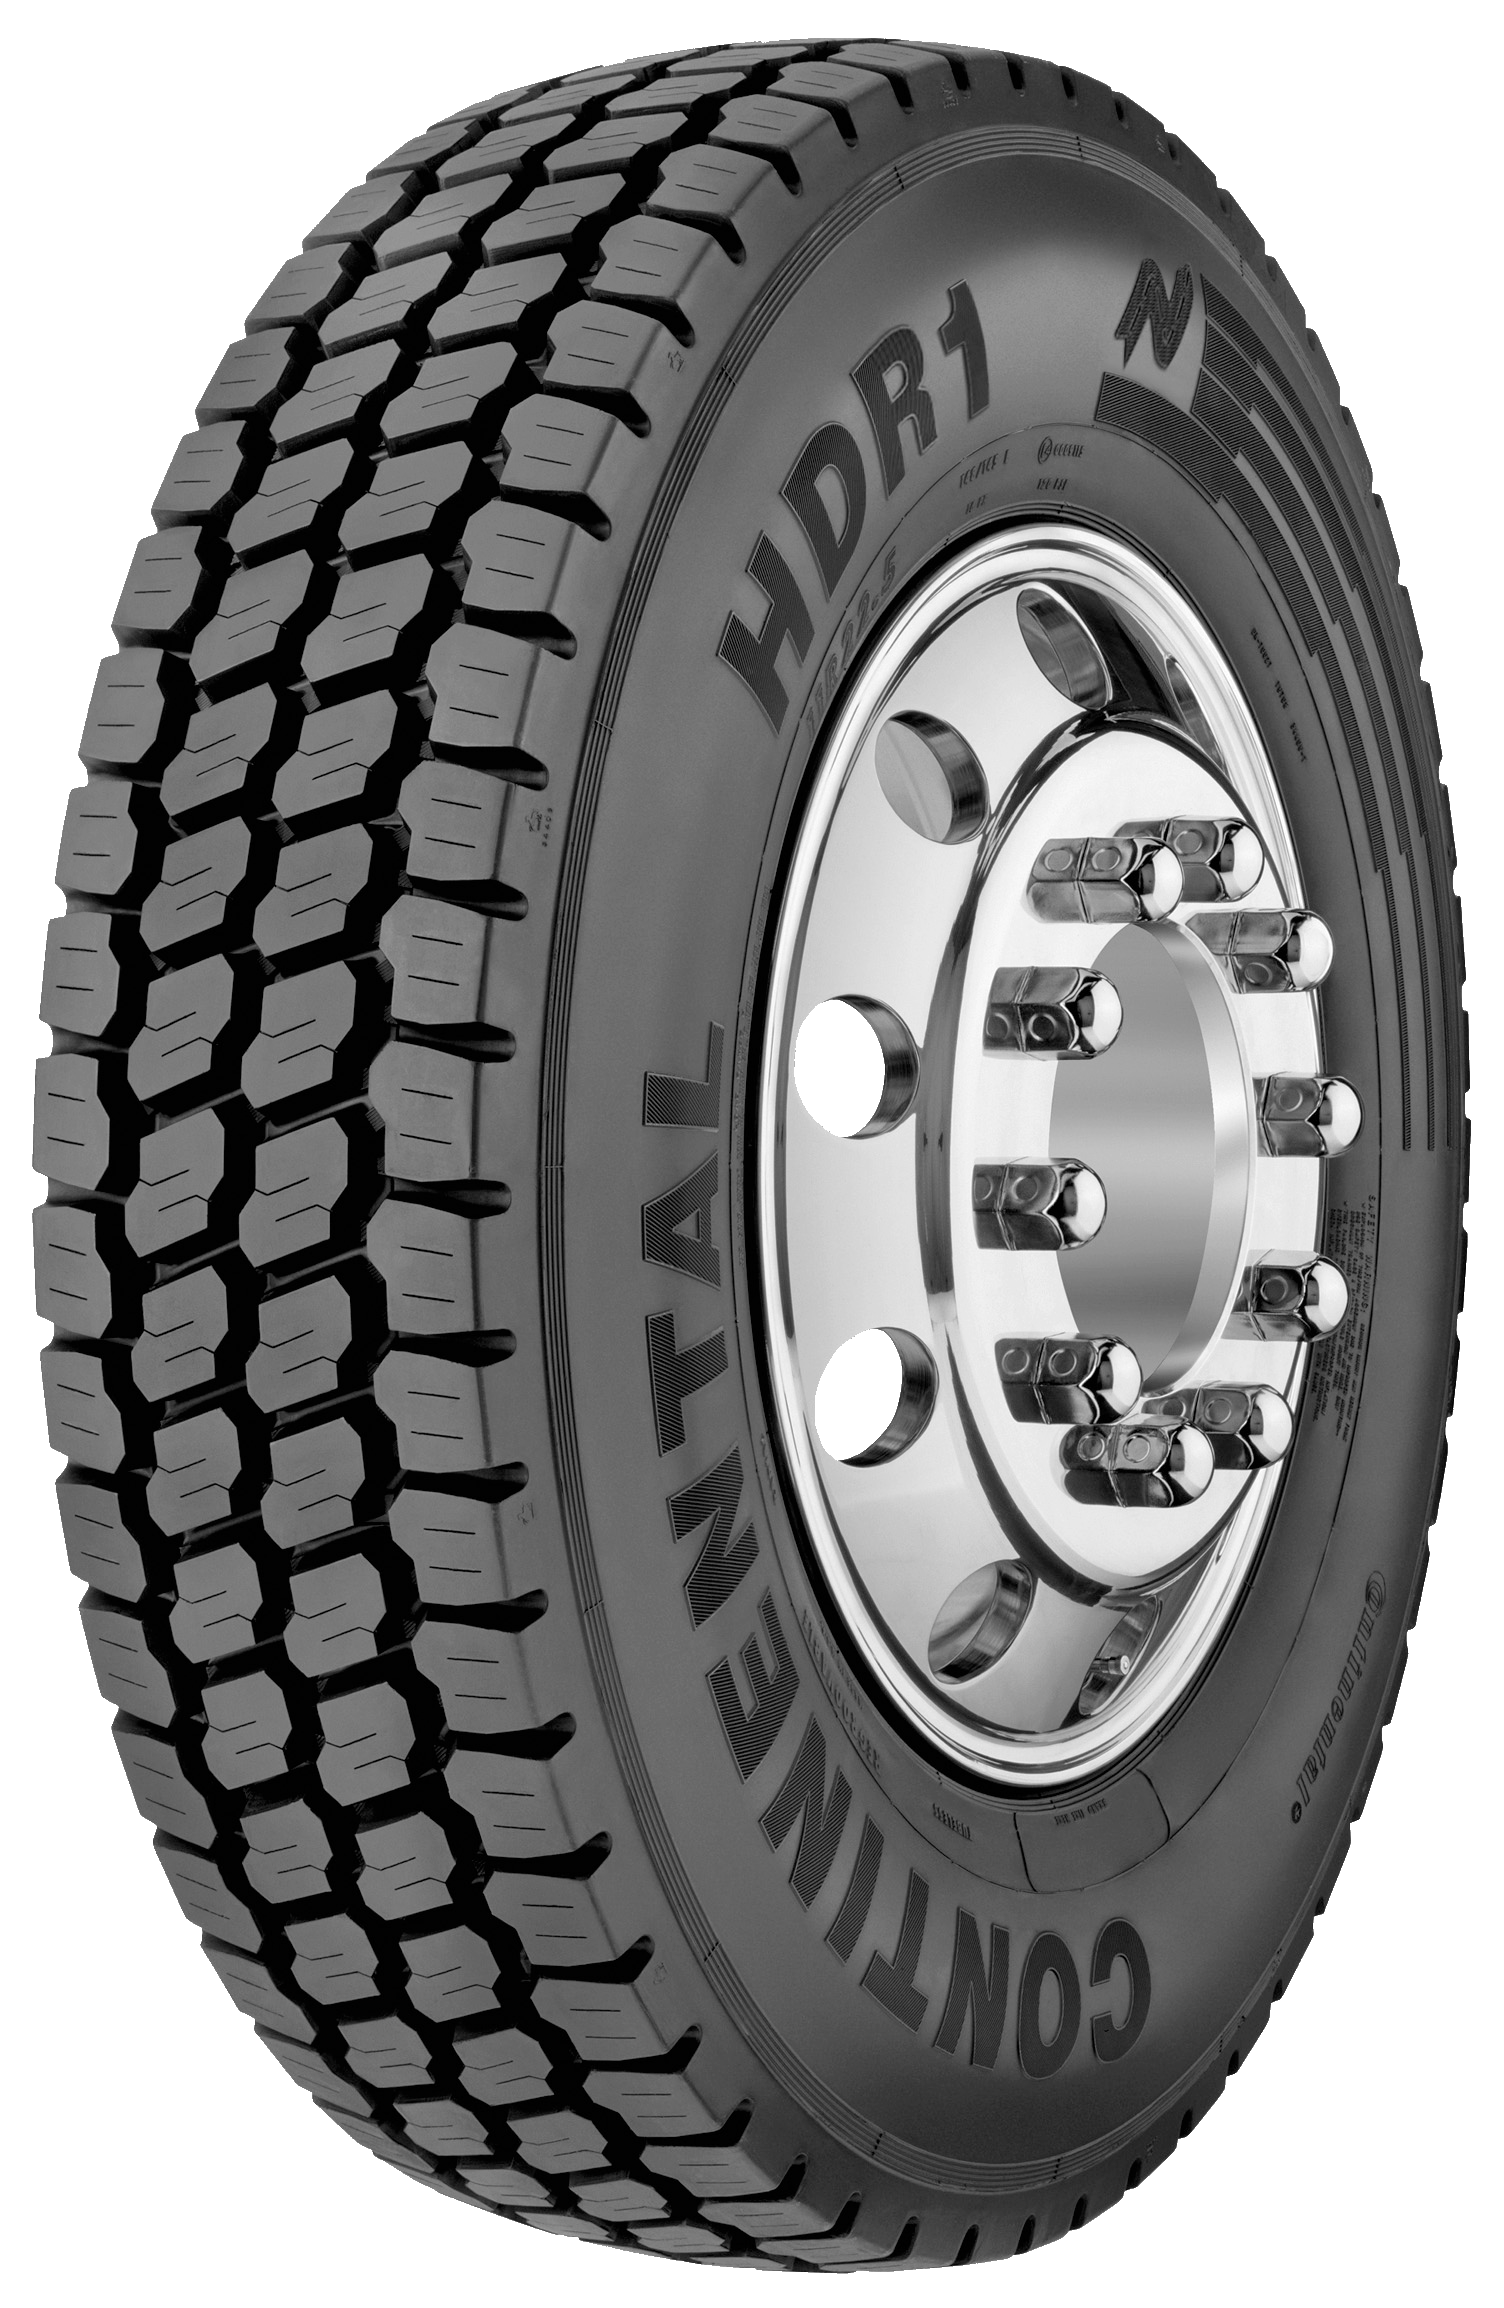 Continental Corporation - New Regional Drive Tire from Continental